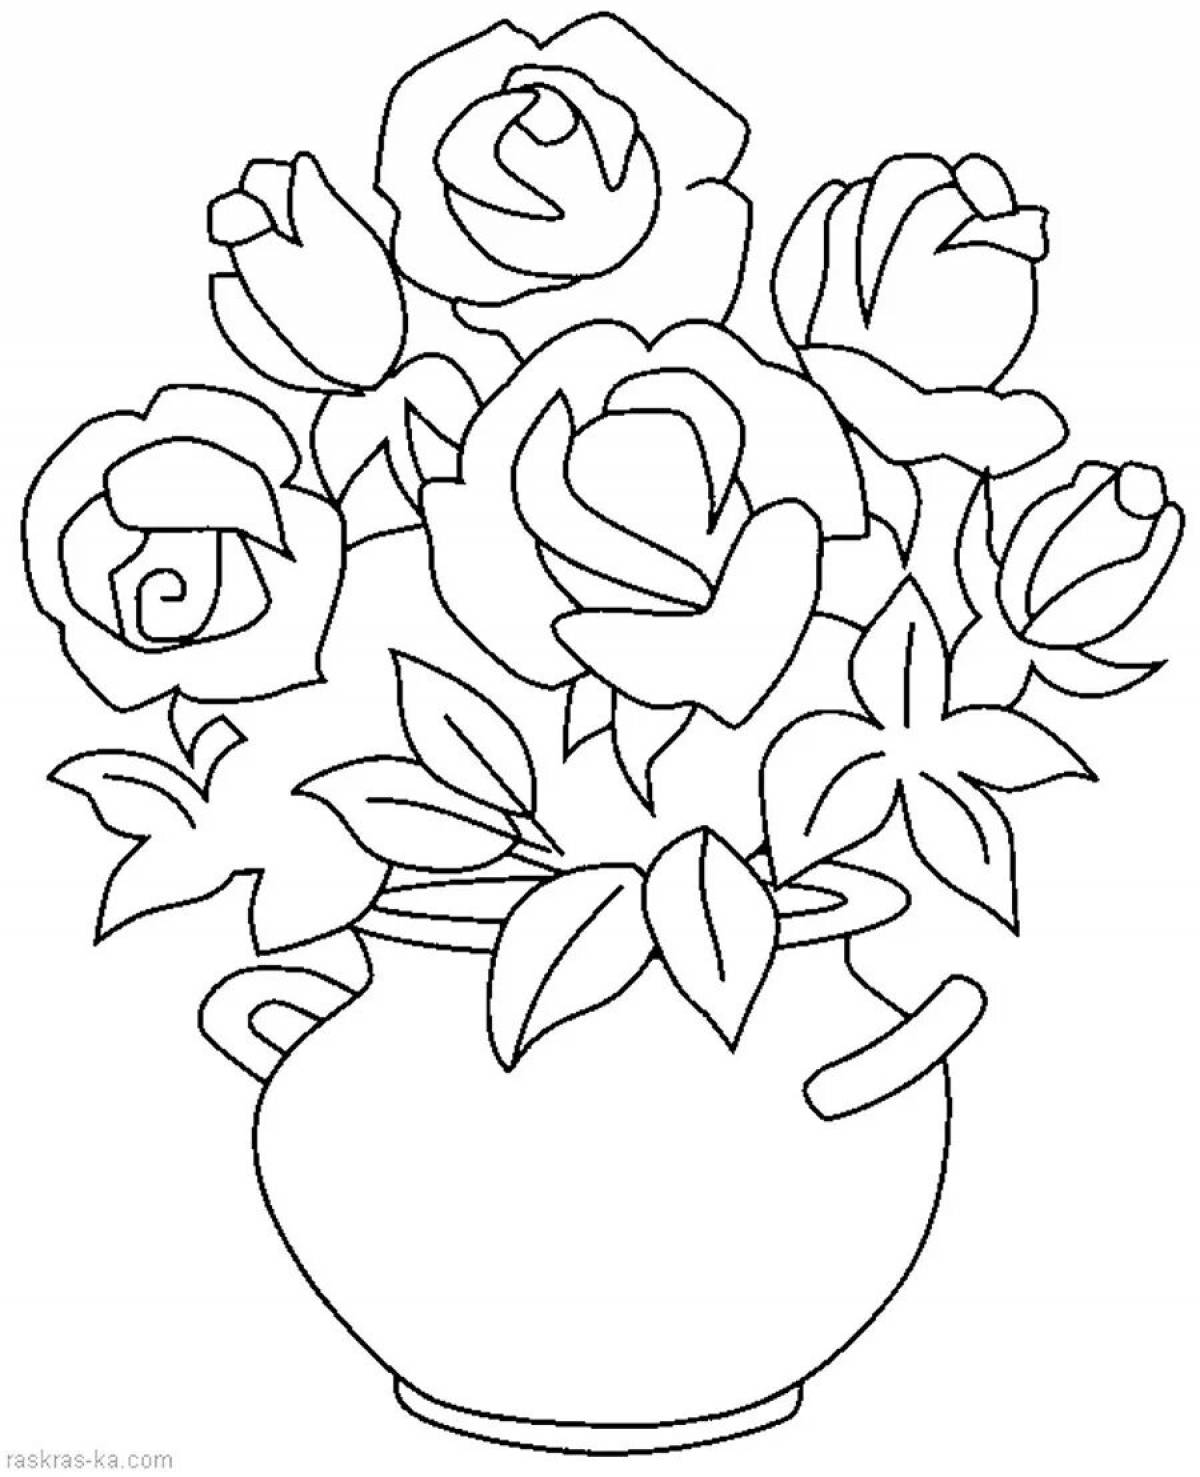 Coloring big bouquet for mom